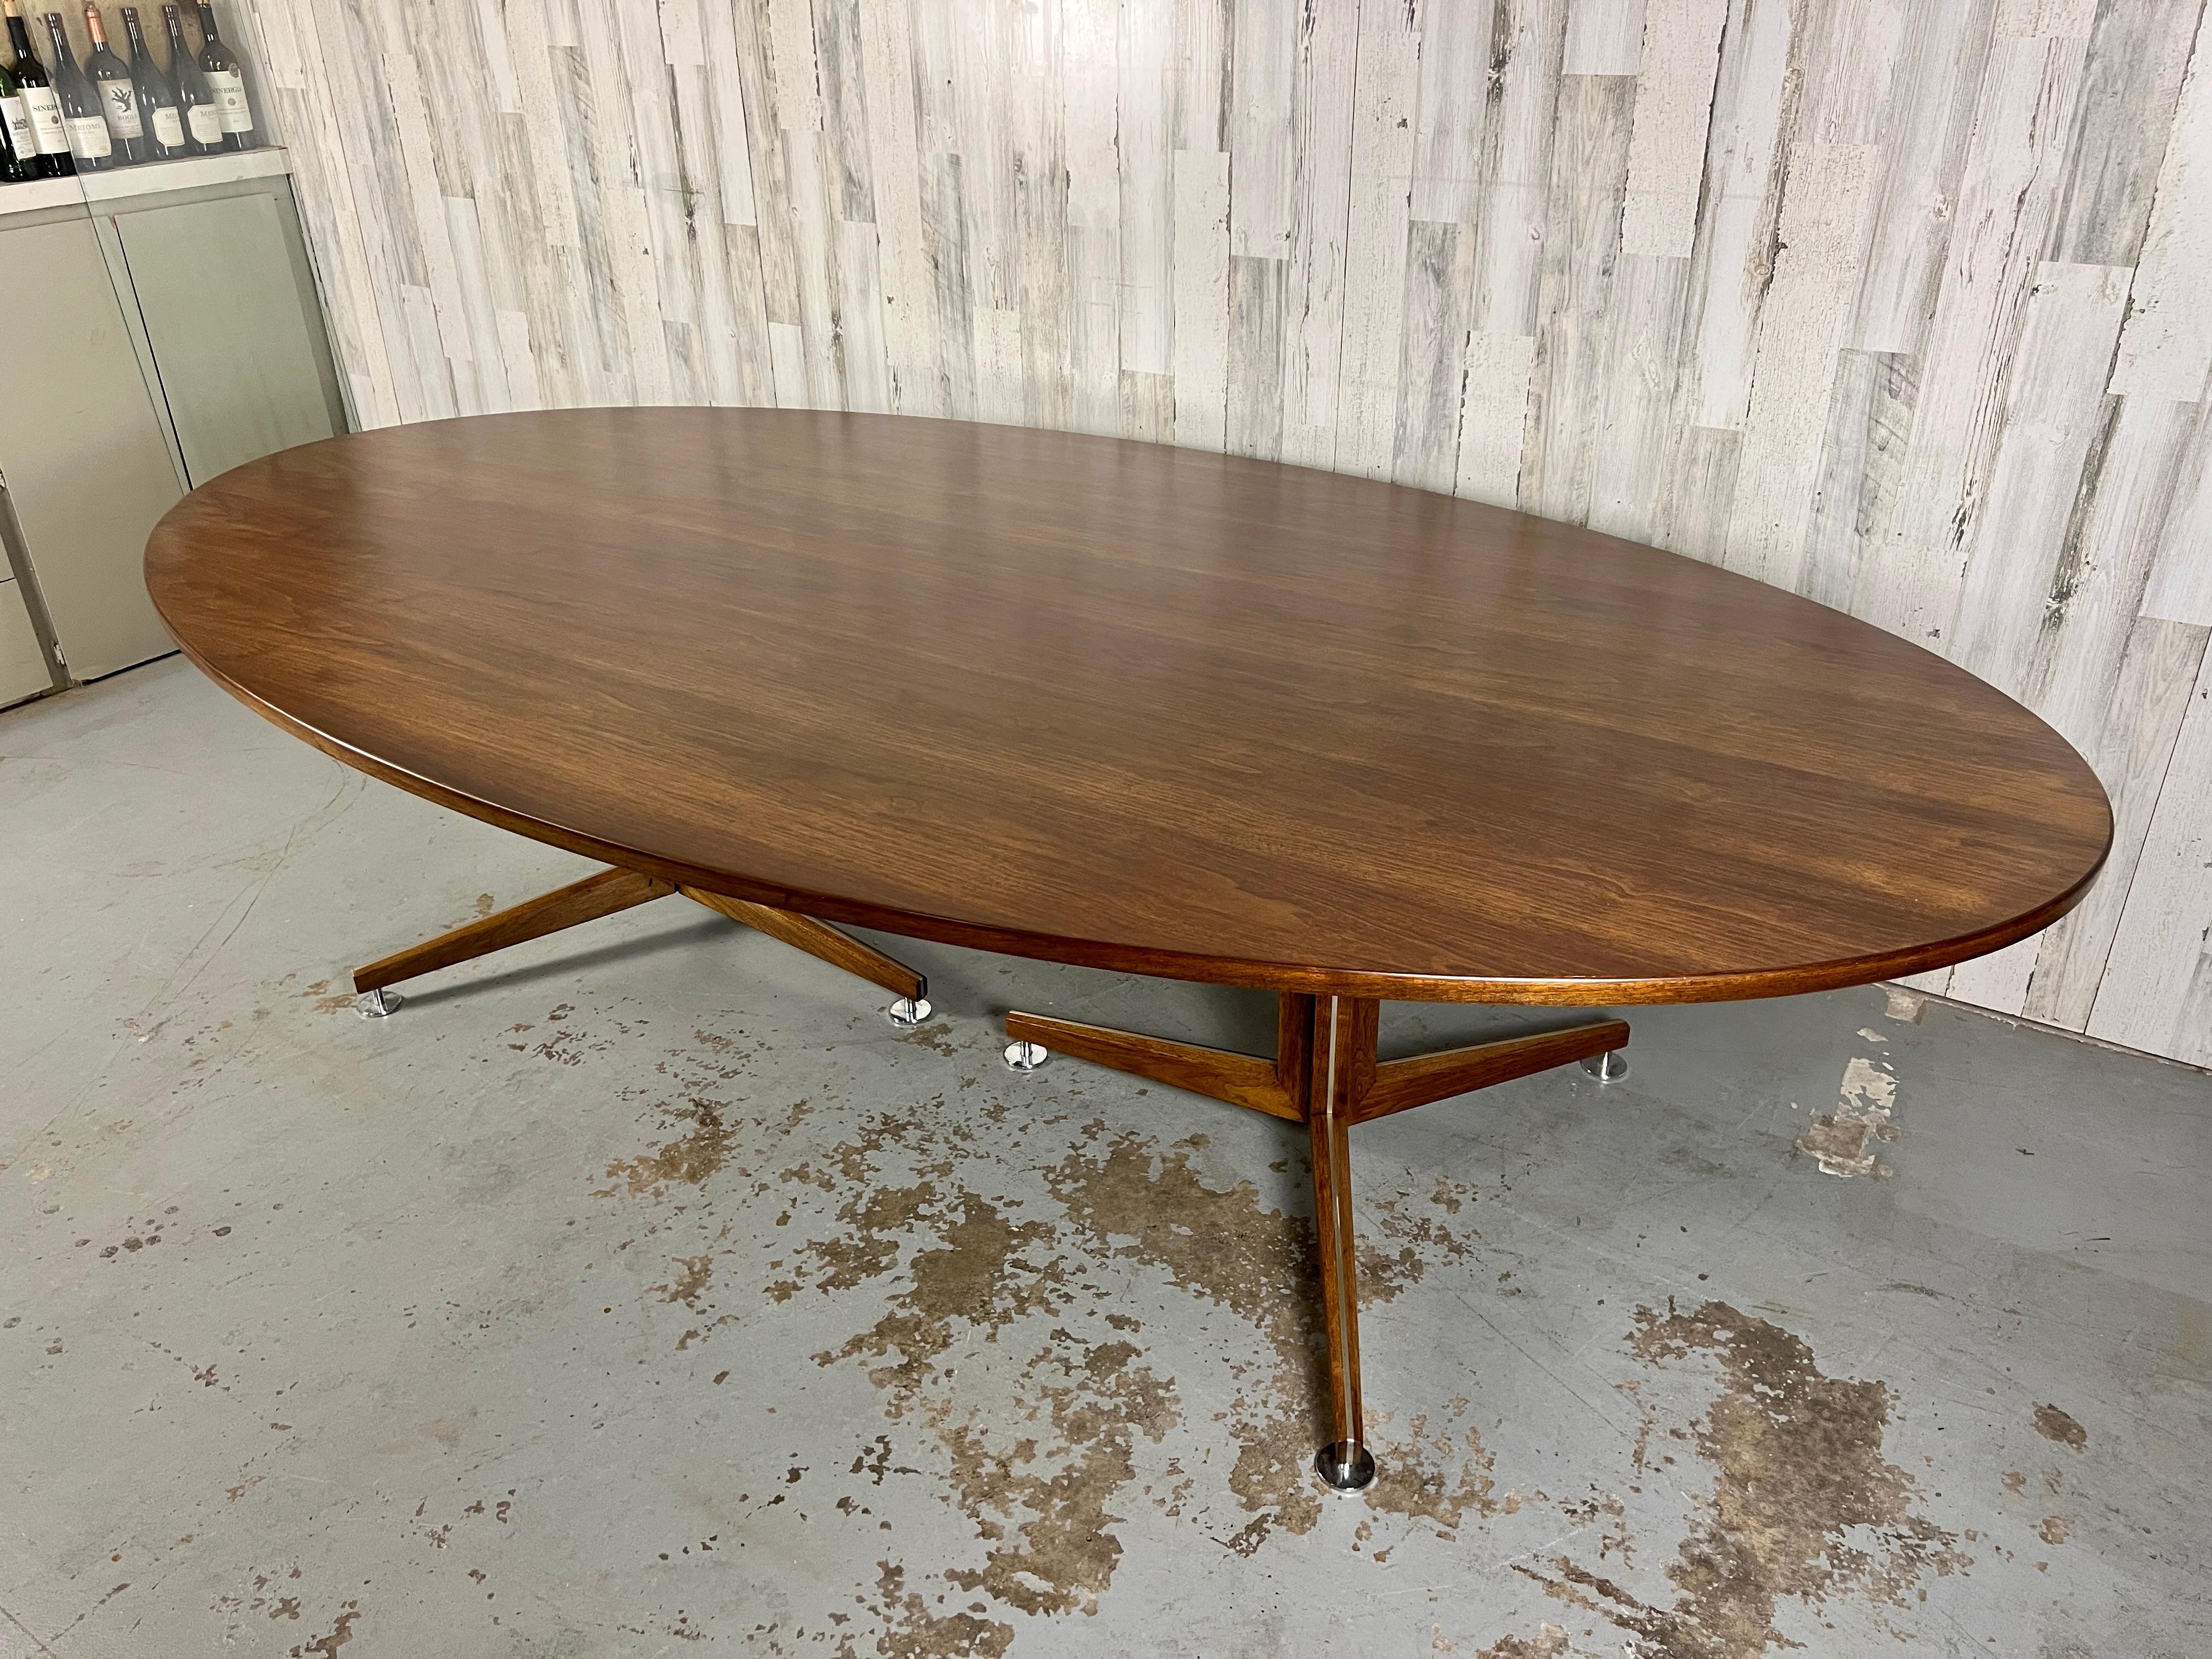 20th Century Edward Wormley for Dunbar Elliptical Conference / Dining Table For Sale